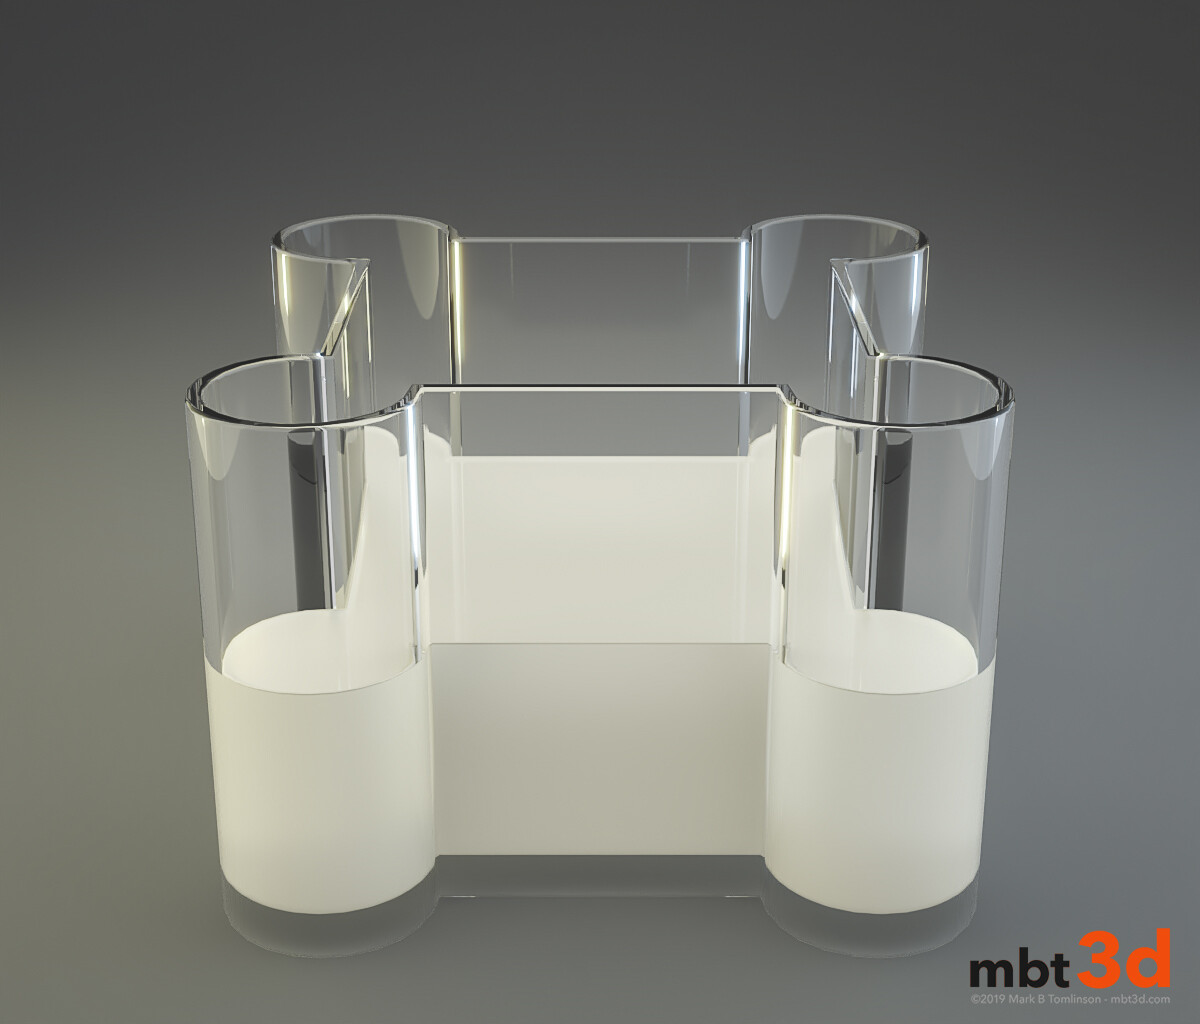 Vase: 2 Initial liquid test with low refraction samples and no SSS